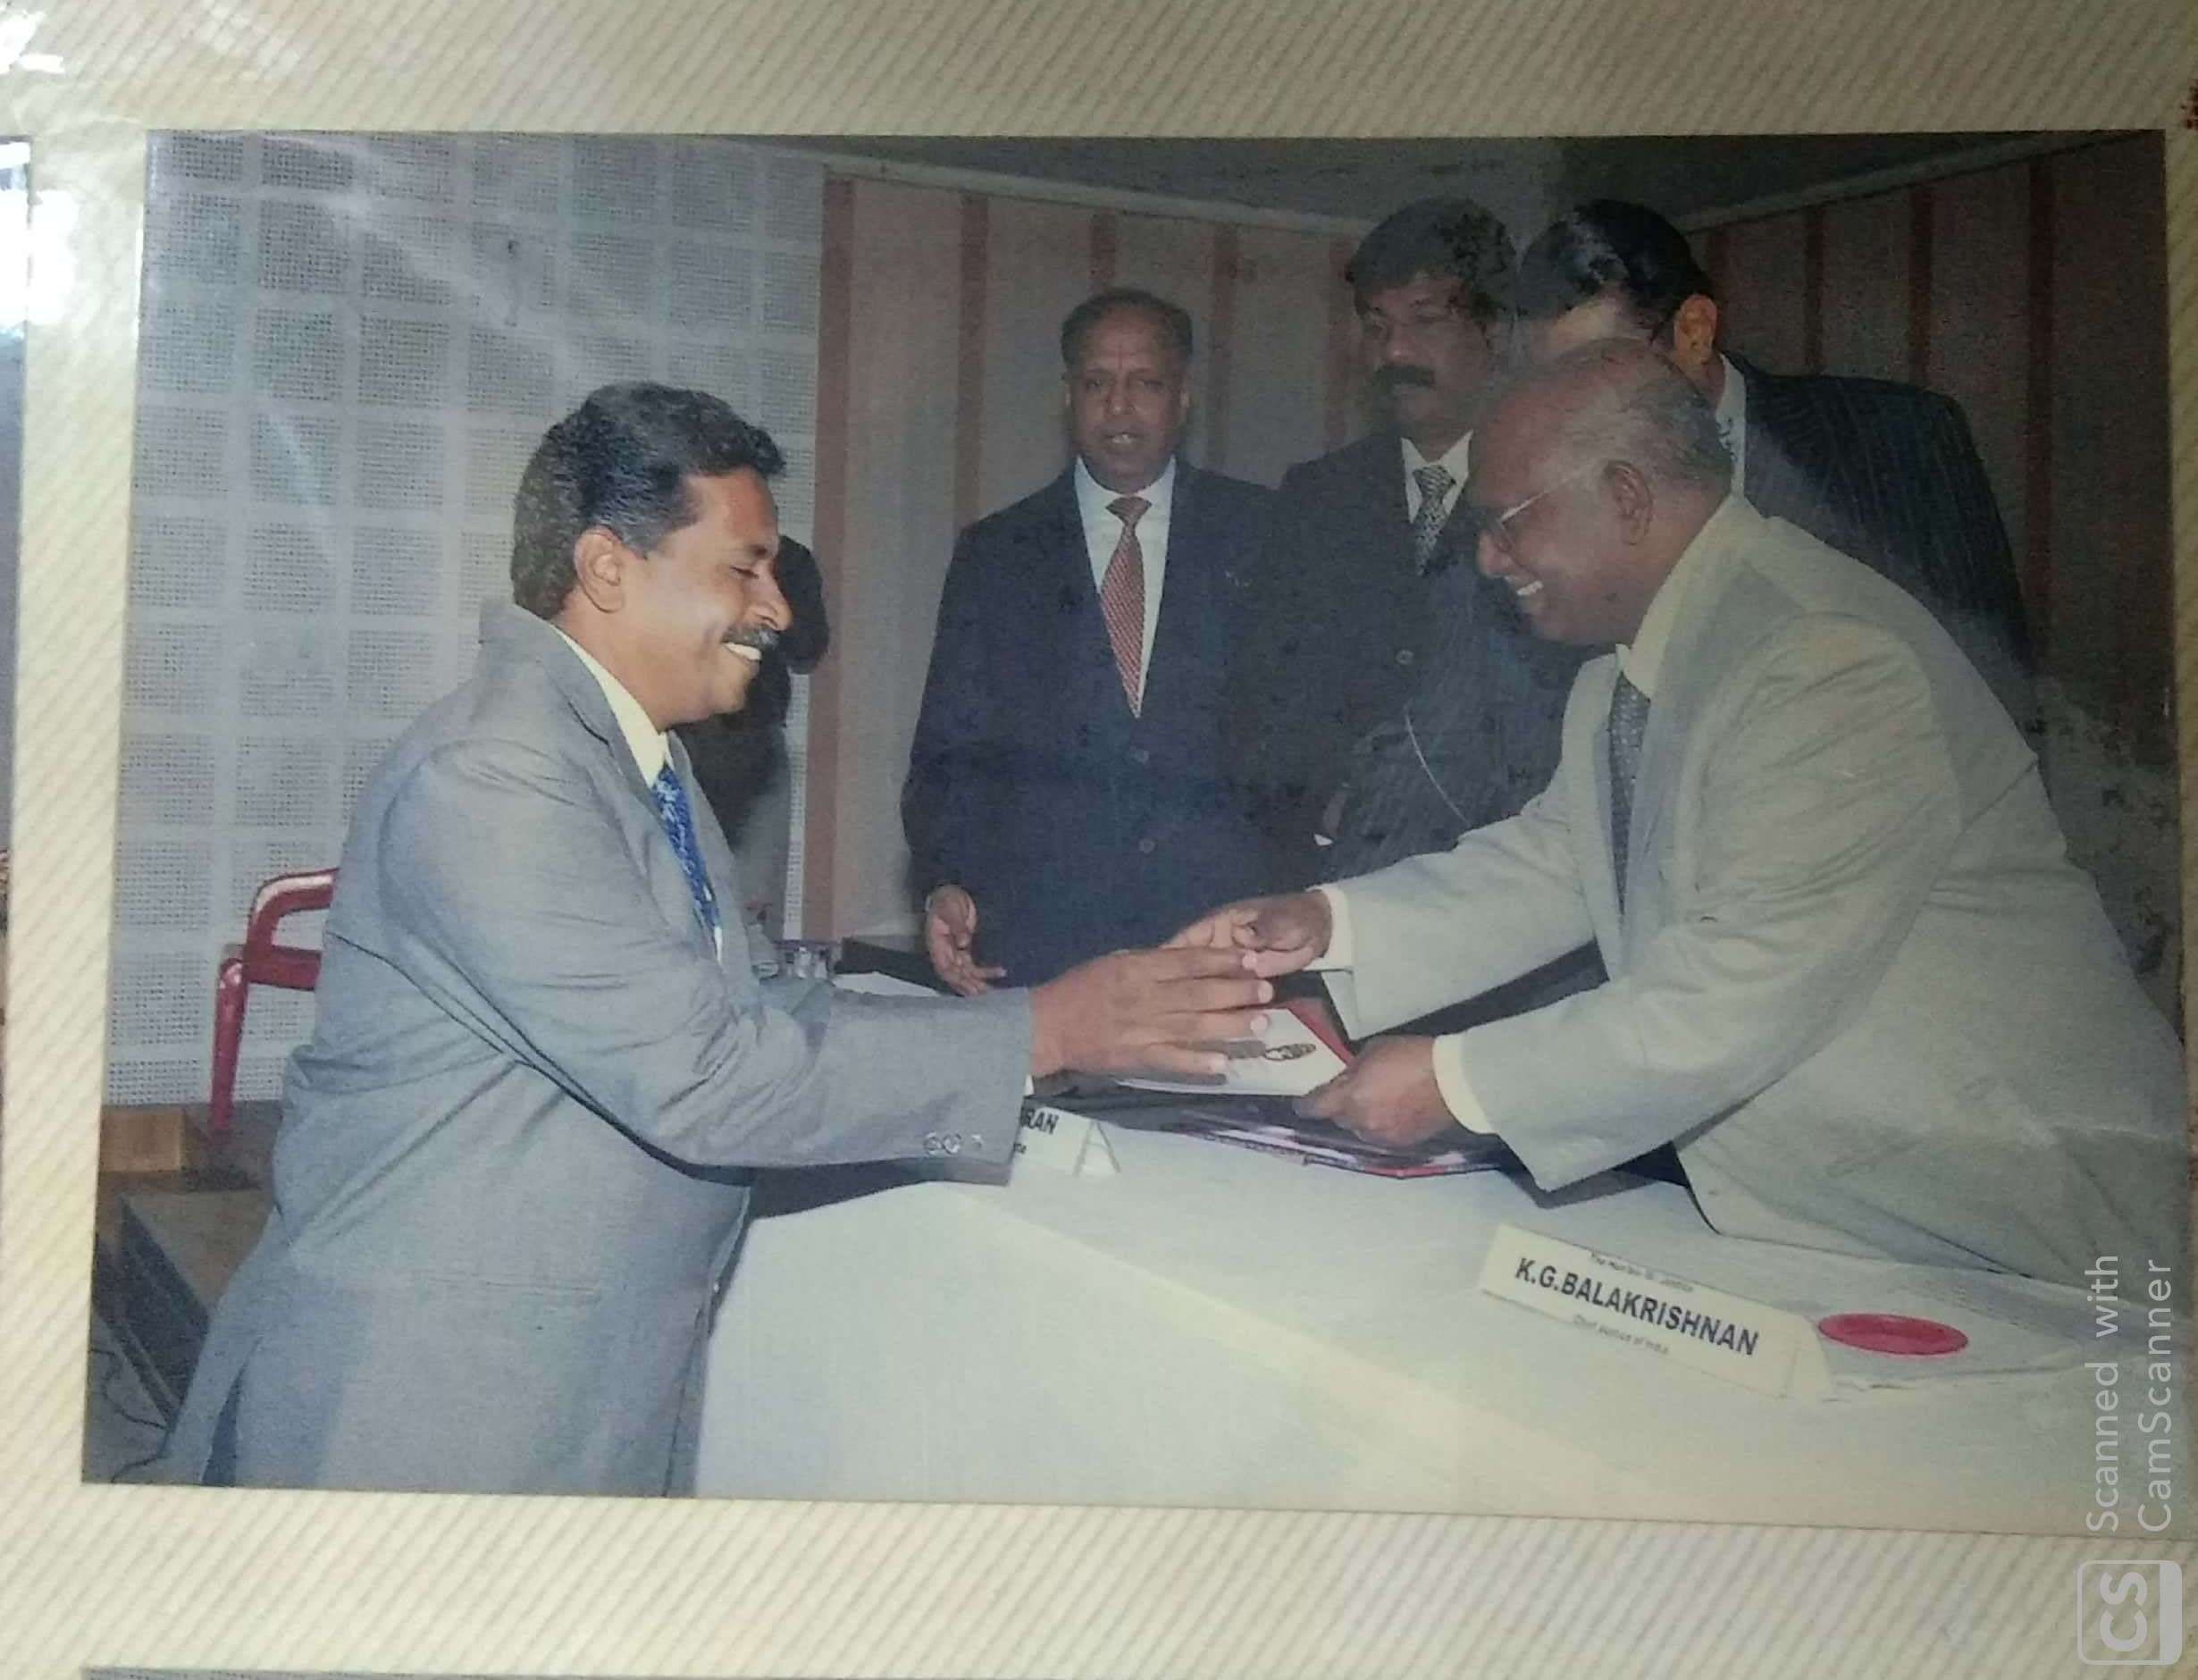 Hon’ble Mr.Justice K.G.Balakrishnan, the then Chief Justice of India handing over Accreditation Certificate to Hon’ble Mr. Justice M. Govindaraj, one among the first Batch Mediators of TNMCC